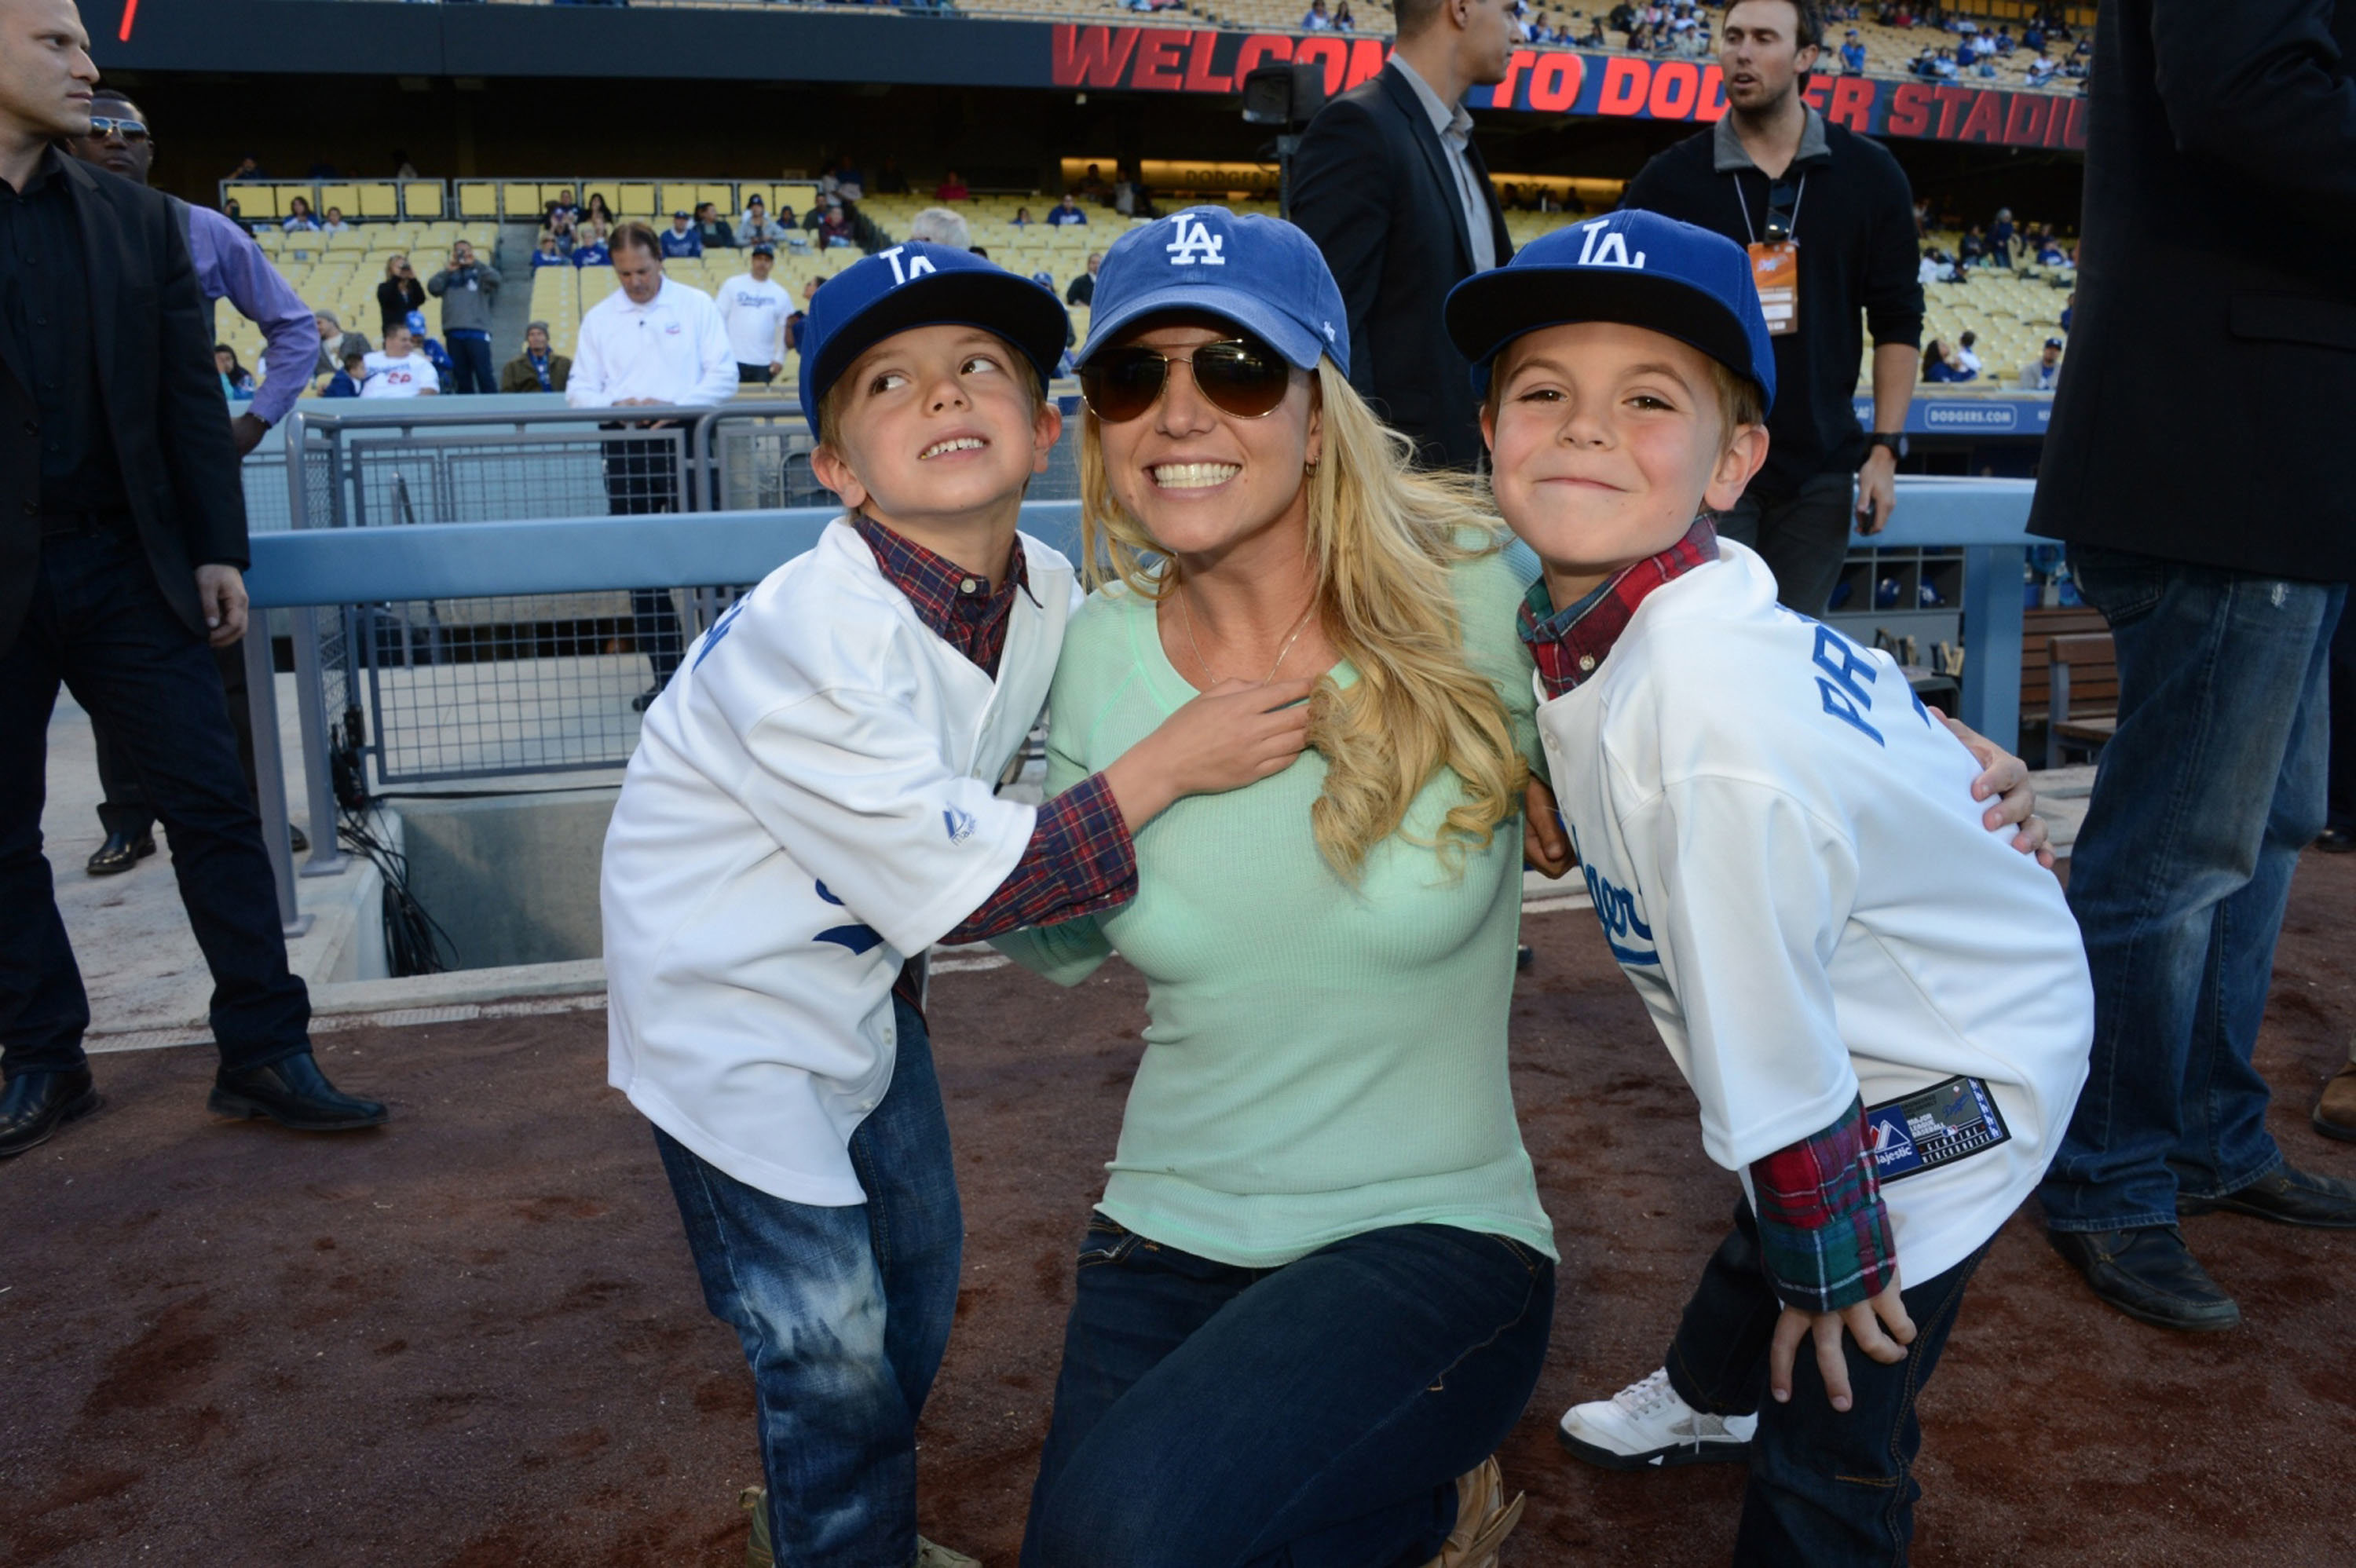 Britney Spears arrives with sons Sean and Jayden at the Los Angeles Dodgers game against the San Diego Padres Wednesday, April 17, 2013 at Dodger Stadium in Los Angeles, California. Photo by Jon SooHoo/LA Dodgers,LLC 2013.